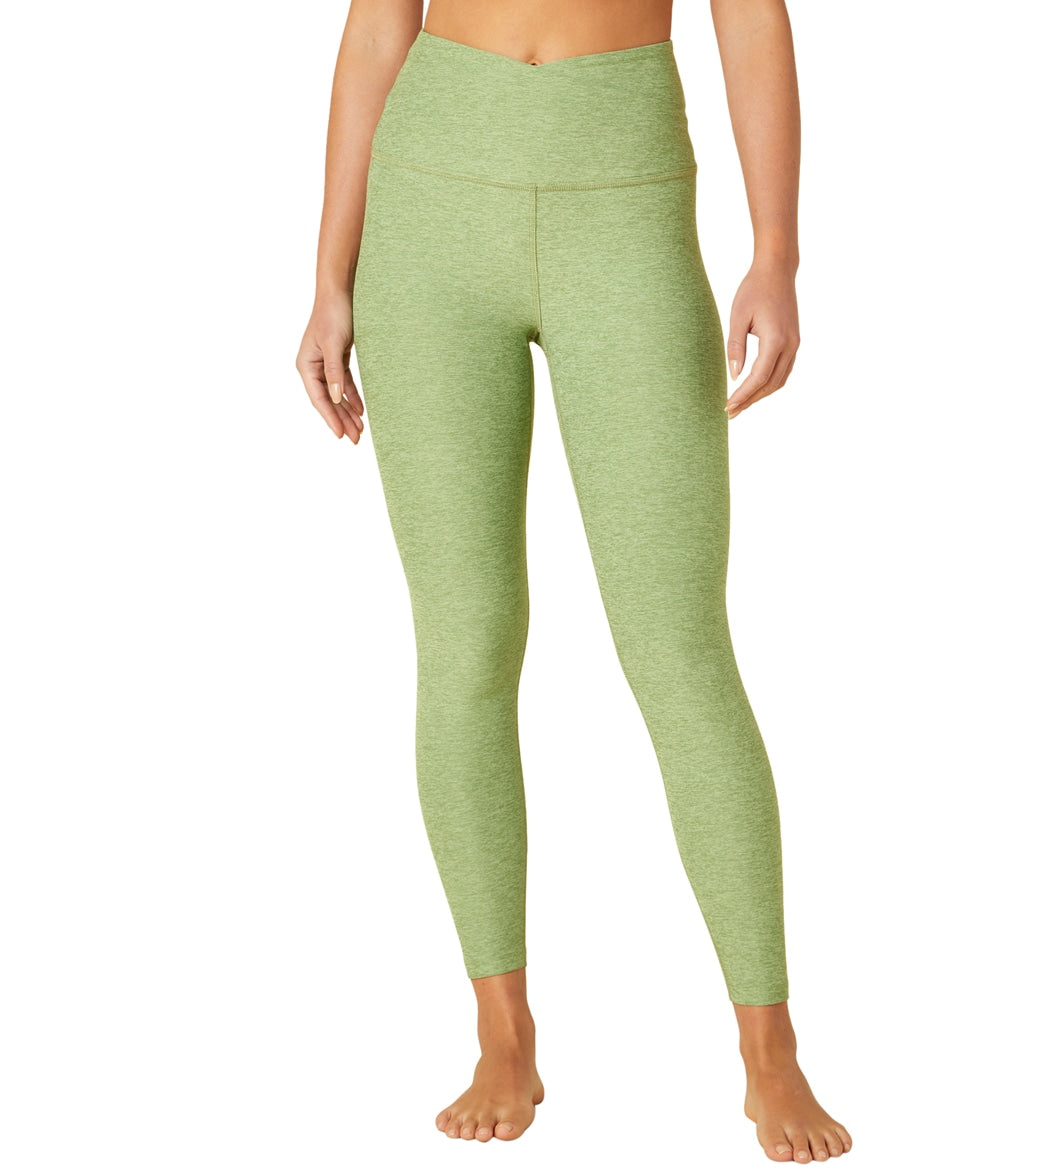 Beyond Yoga Women's Spacedye At Your Leisure High Waisted 7/8 Leggings - Rosemary Heather X-Large Spandex Moisture Wicking